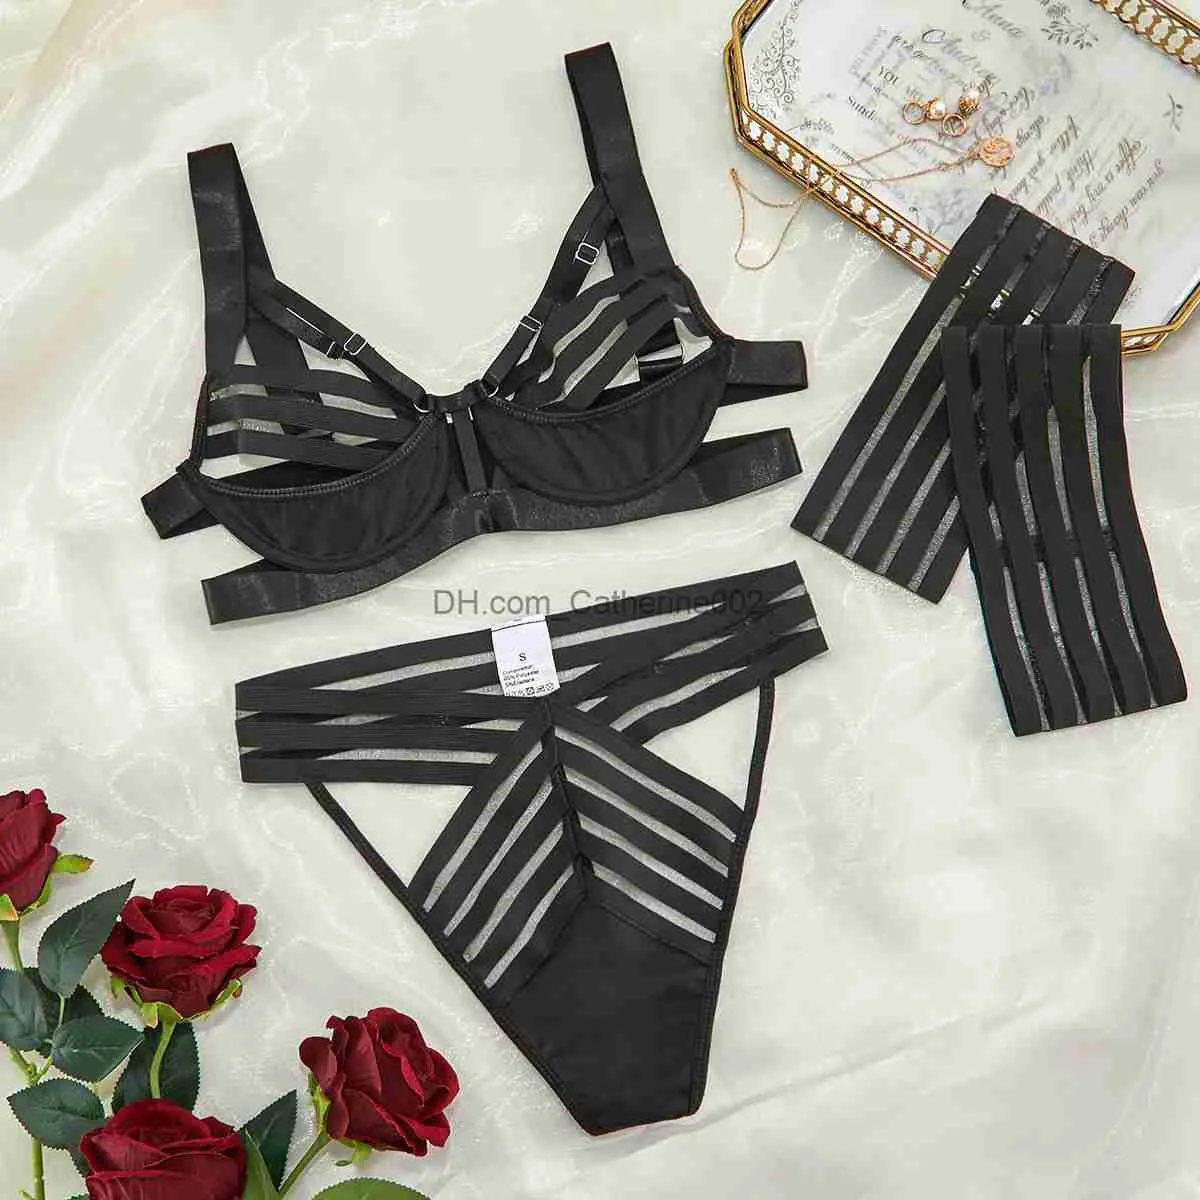 Black Exotic Bandage Lingerie Set With Cut Out Bra And Transparent